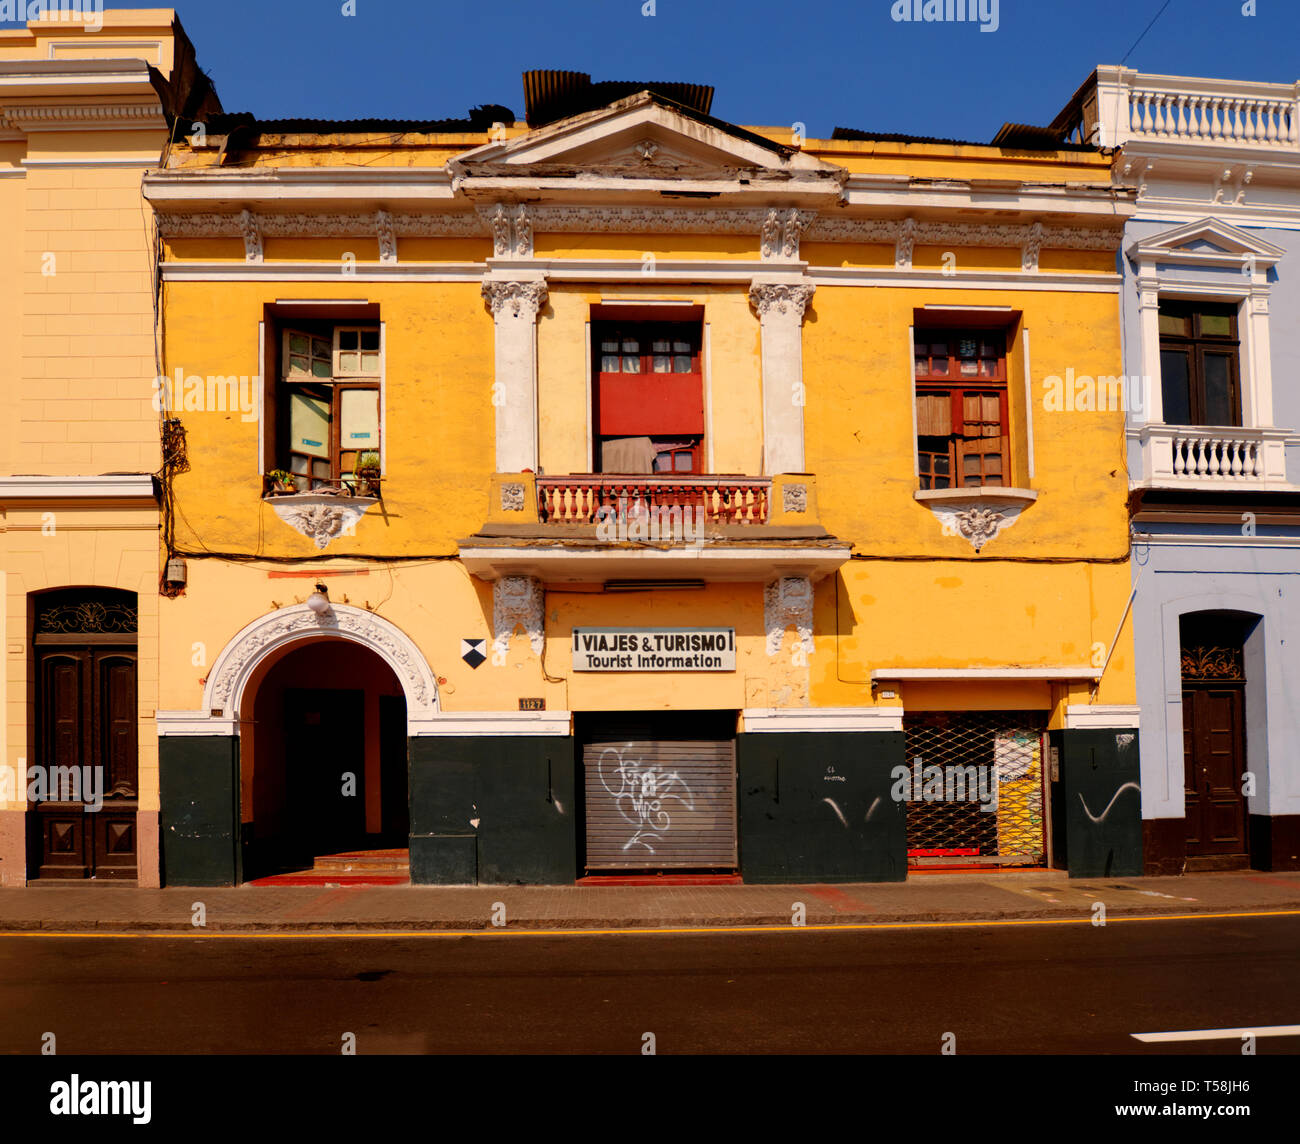 Lima, Peru - April 22, 2018: Old and Dilapidated Tourist Information Building in Lima Peru Stock Photo